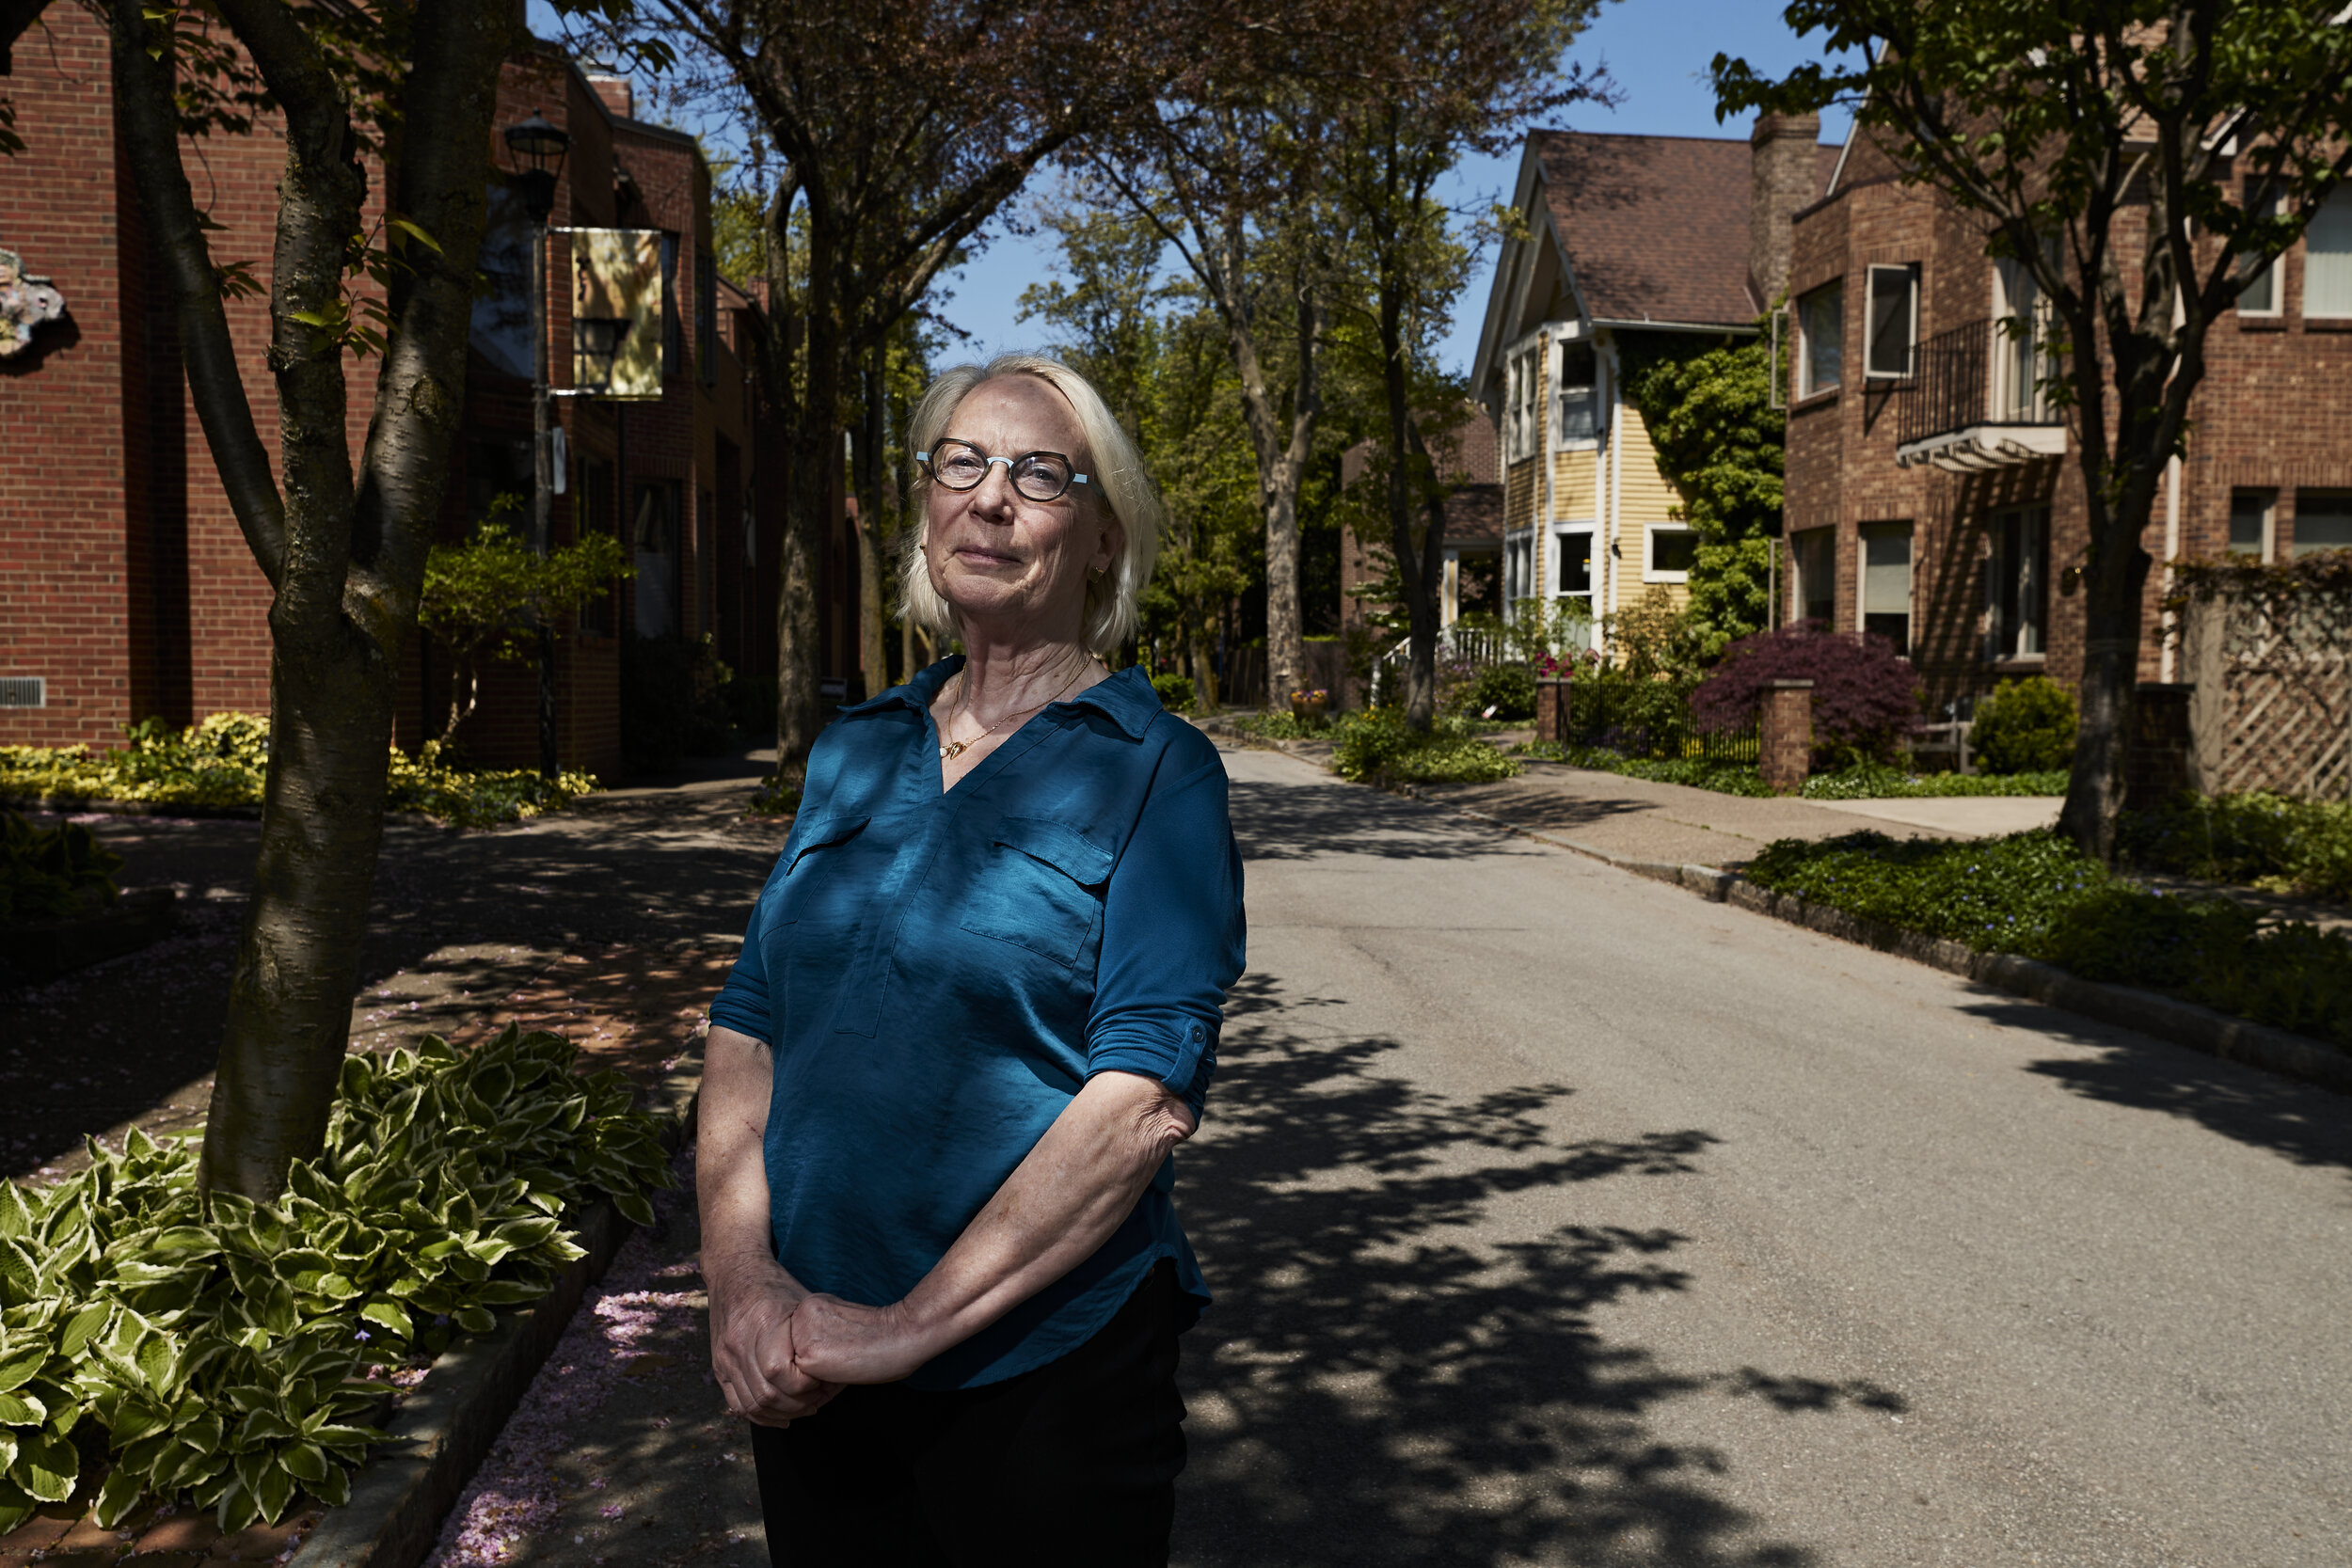  Suzanne Mayer, President and Founder of Hinge Neighbors, in her neighborhood near Inner Loop North in Rochester, N.Y. on May 17, 2021. (Mustafa Hussain for The New York Times) 